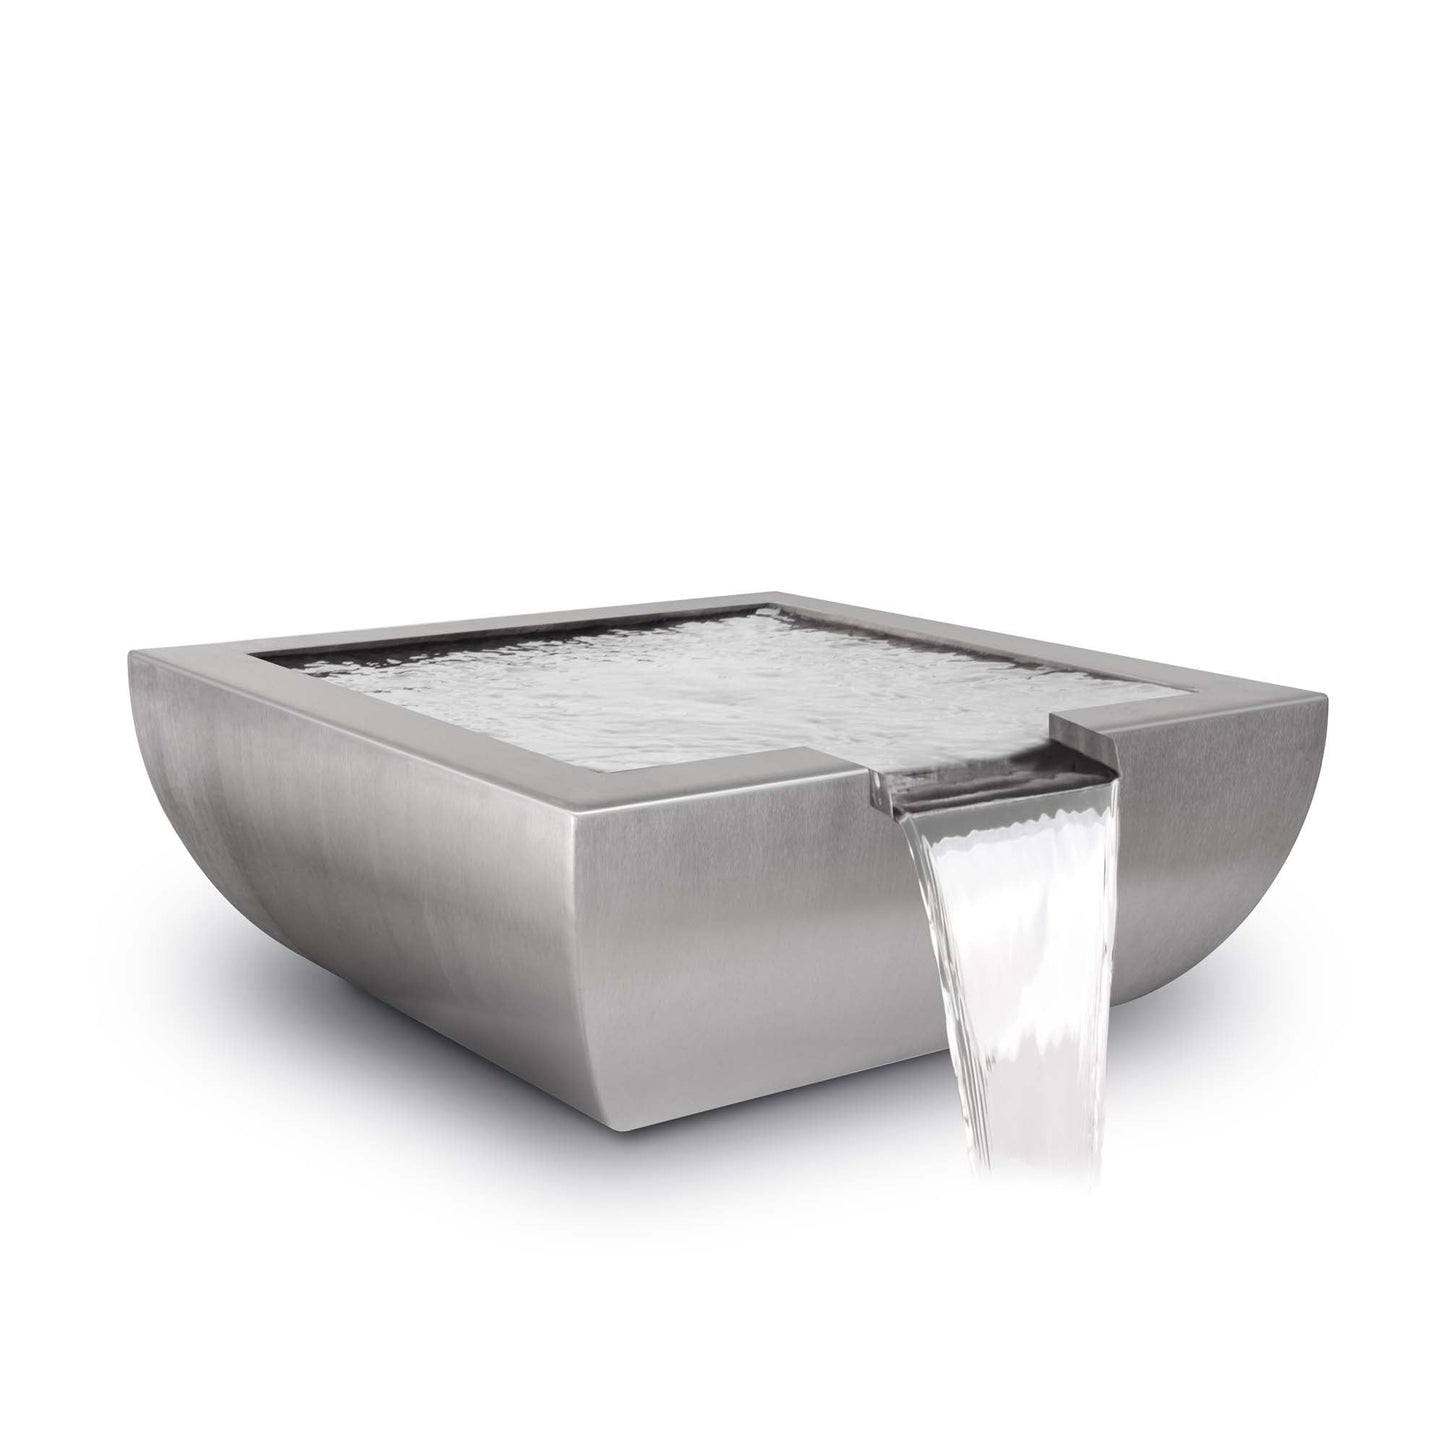 The Outdoor Plus Square Avalon 24" Silver Vein Powder Coated Water Bowl